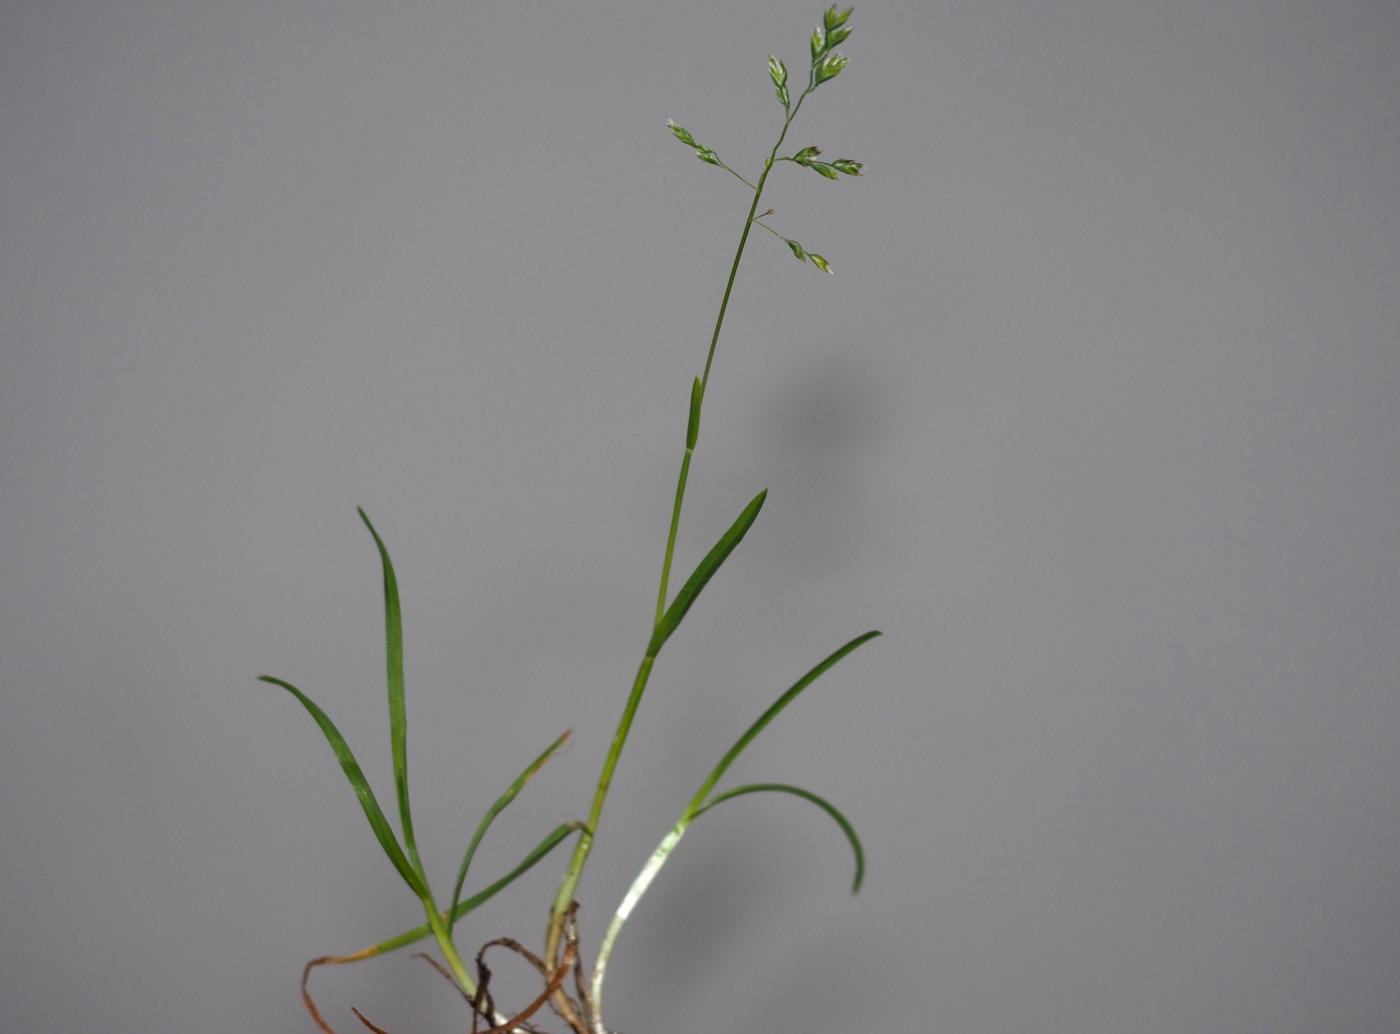 Meadow-grass, Annual plant